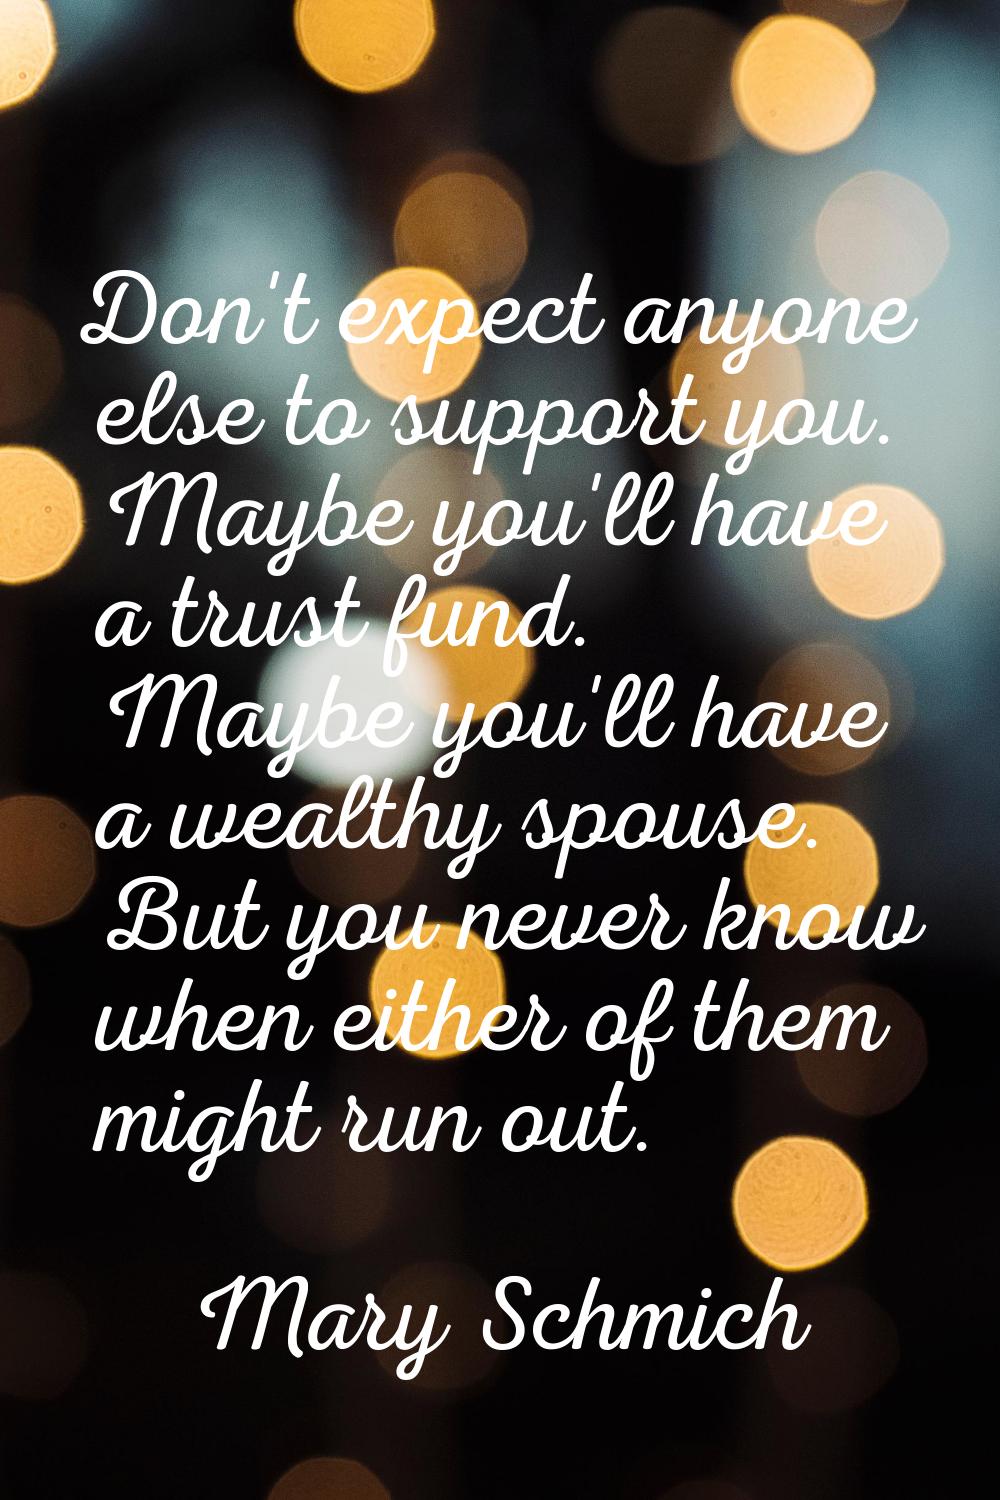 Don't expect anyone else to support you. Maybe you'll have a trust fund. Maybe you'll have a wealth